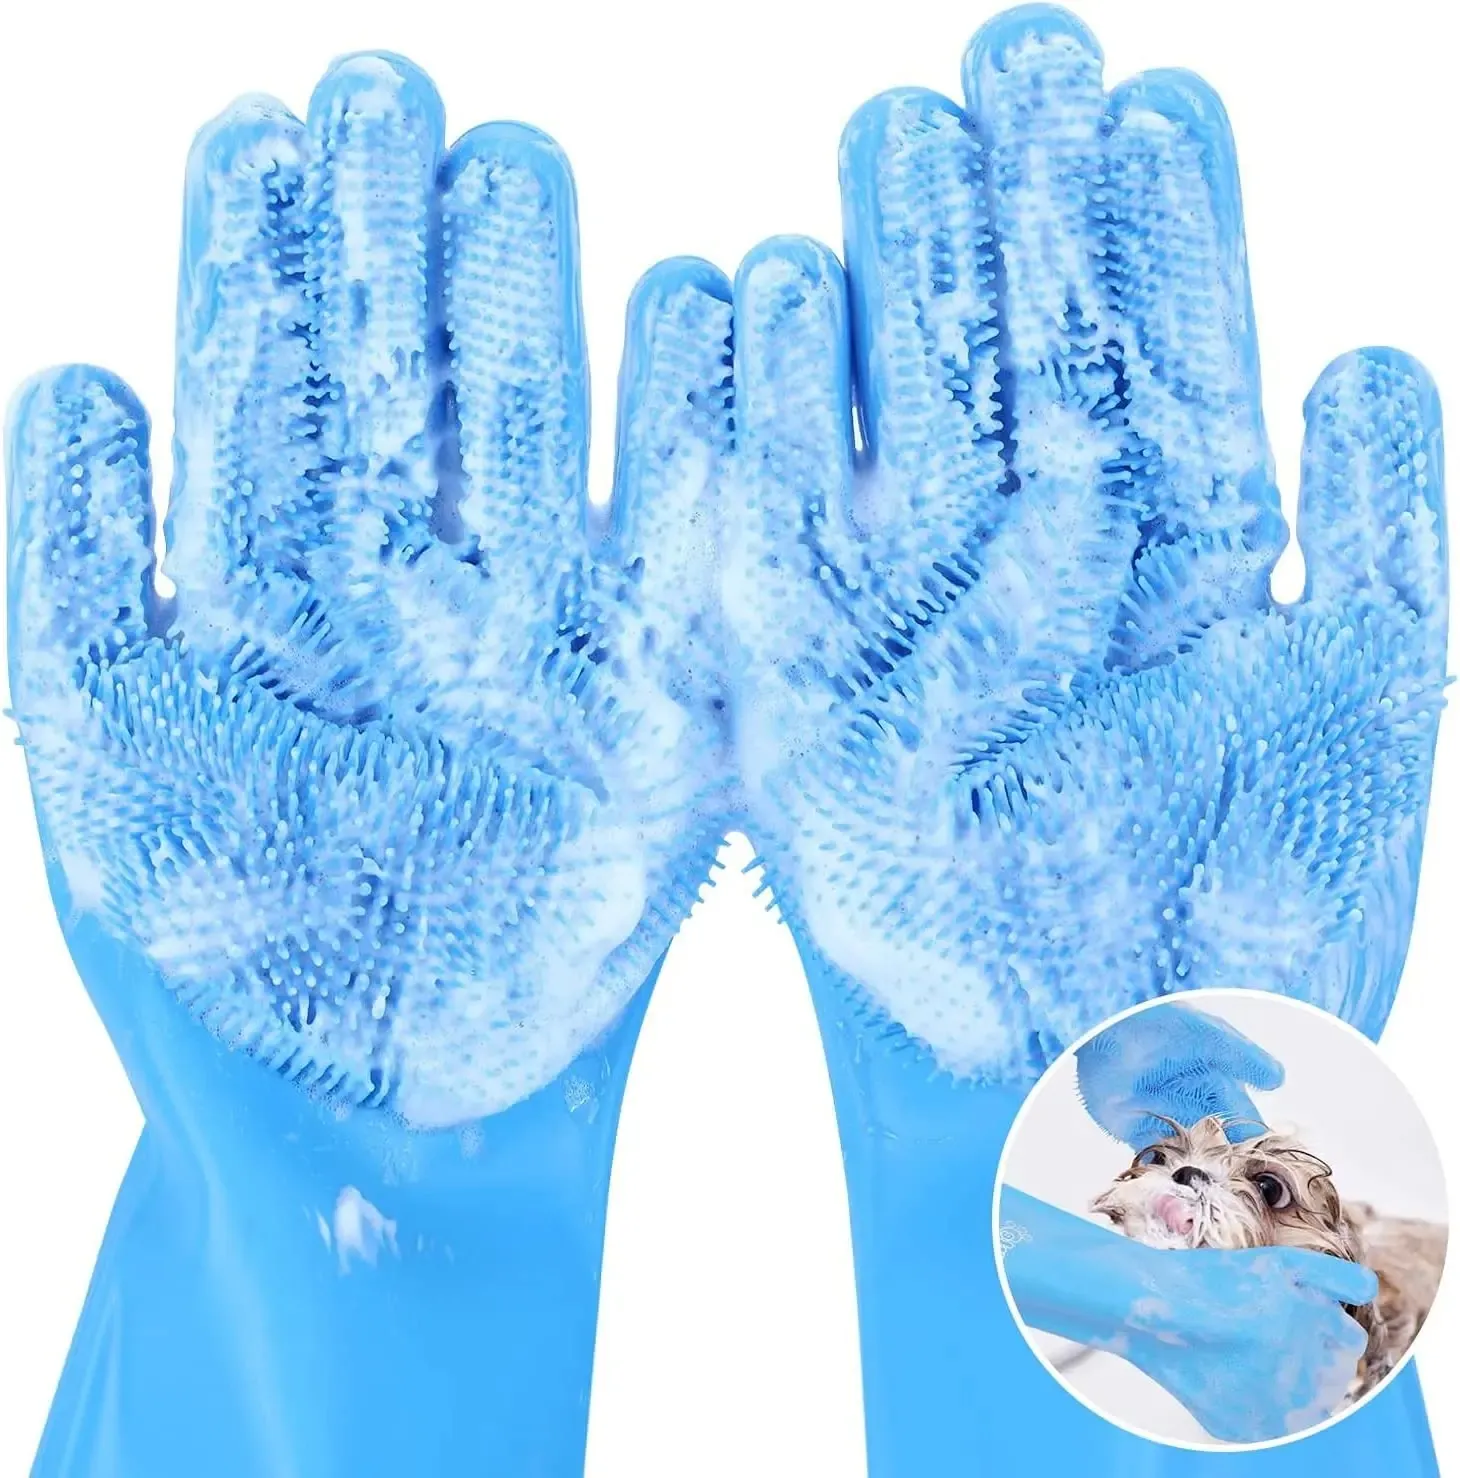 Pet Grooming Bathing Gloves Dog Cat Bathing Shampoo Scrubber Magic Massaging Cleaning Cleaner Sponge Silicon Hair Removal Glove